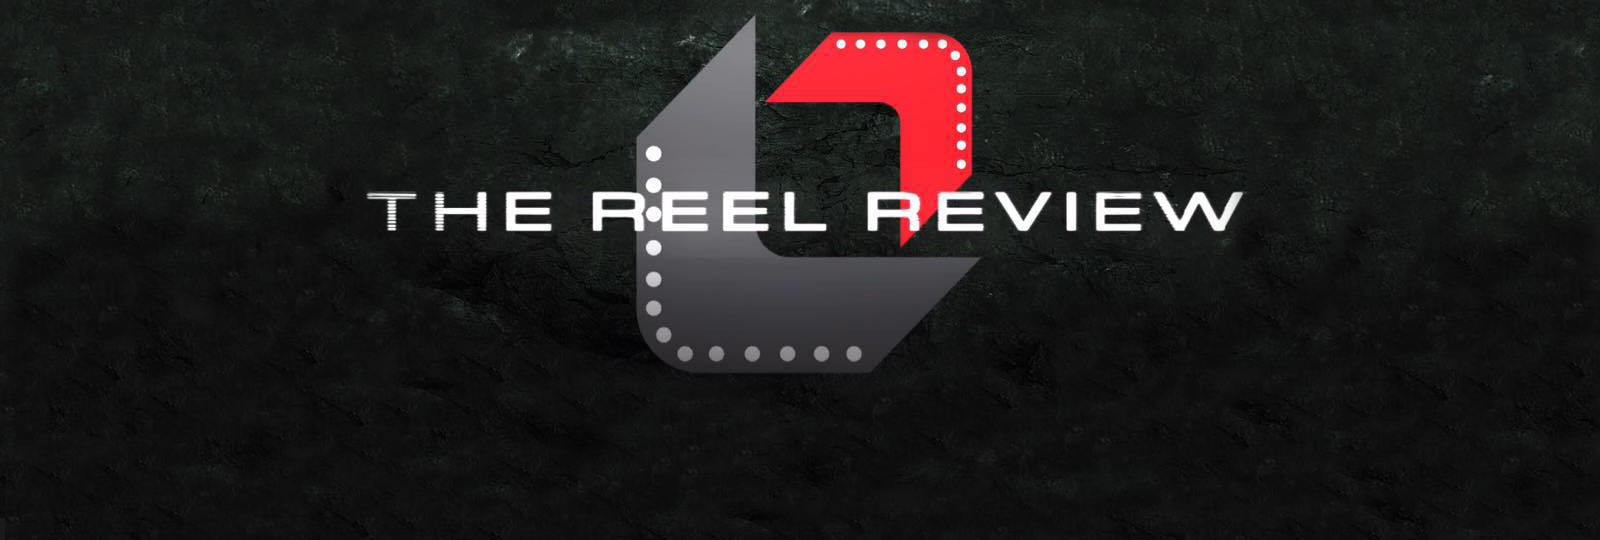 The Reel Review